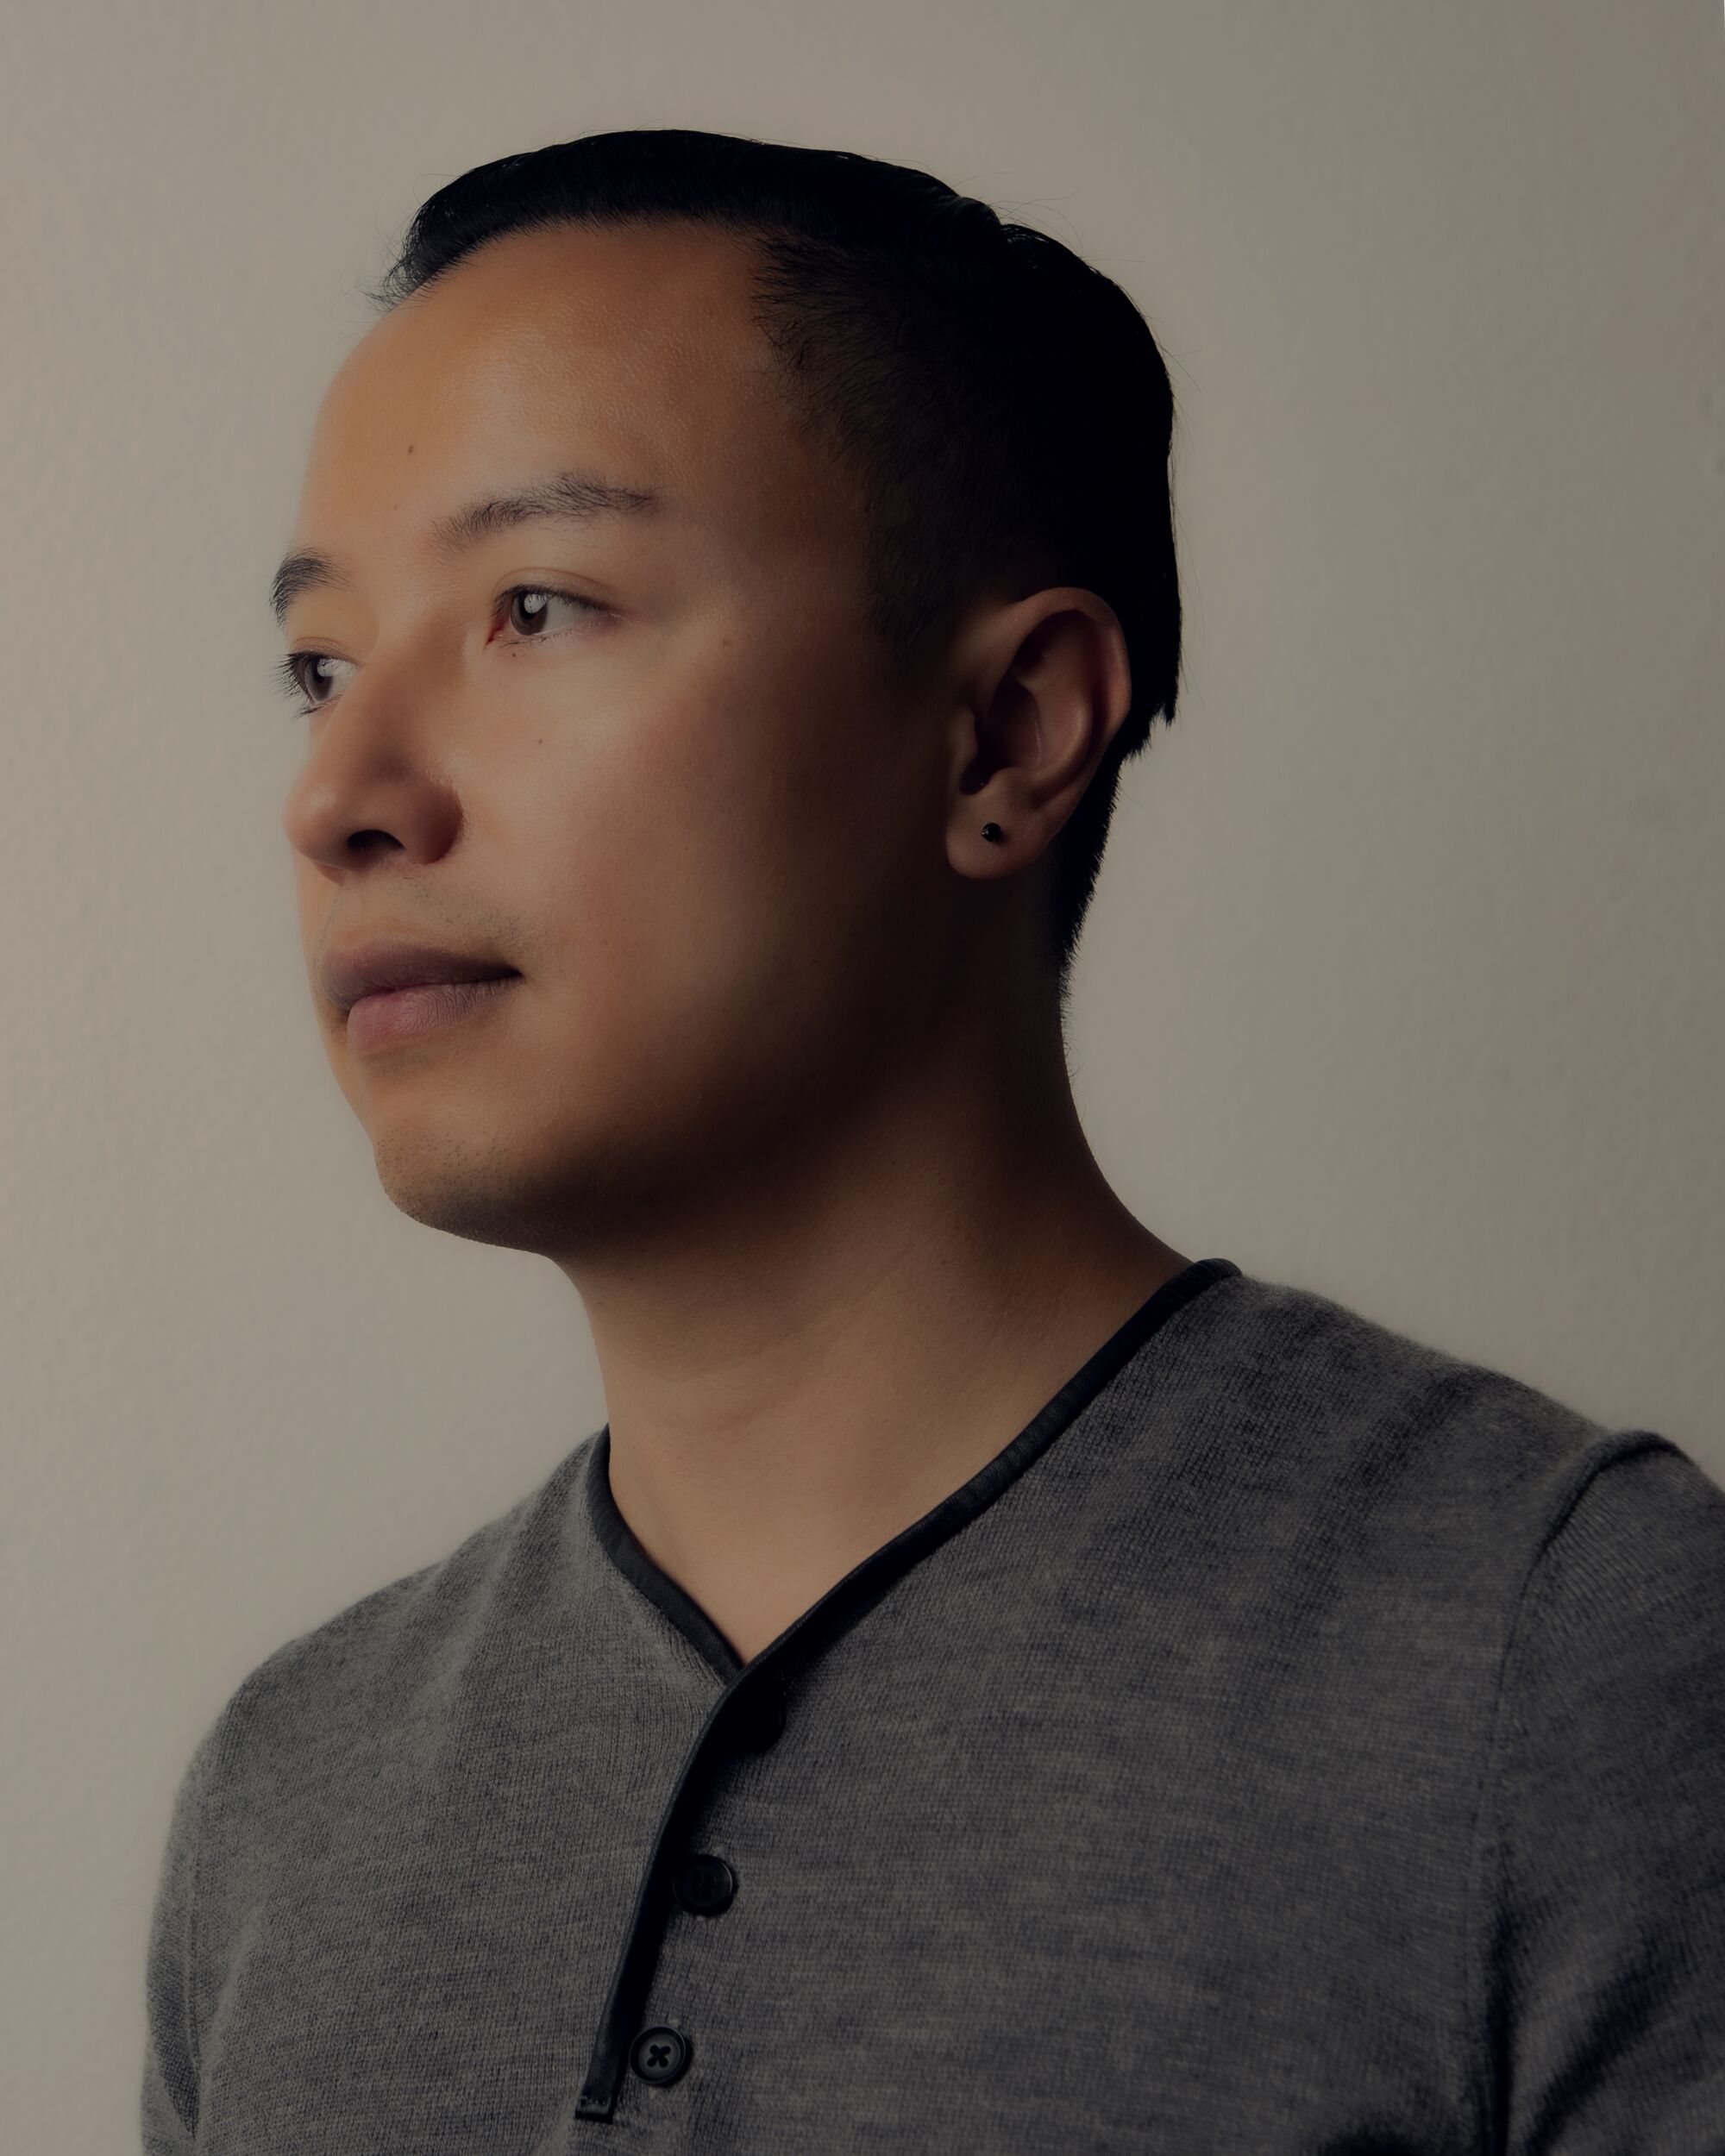 Brendan Nguyen poses for a portrait at his home studio in downtown San Diego.